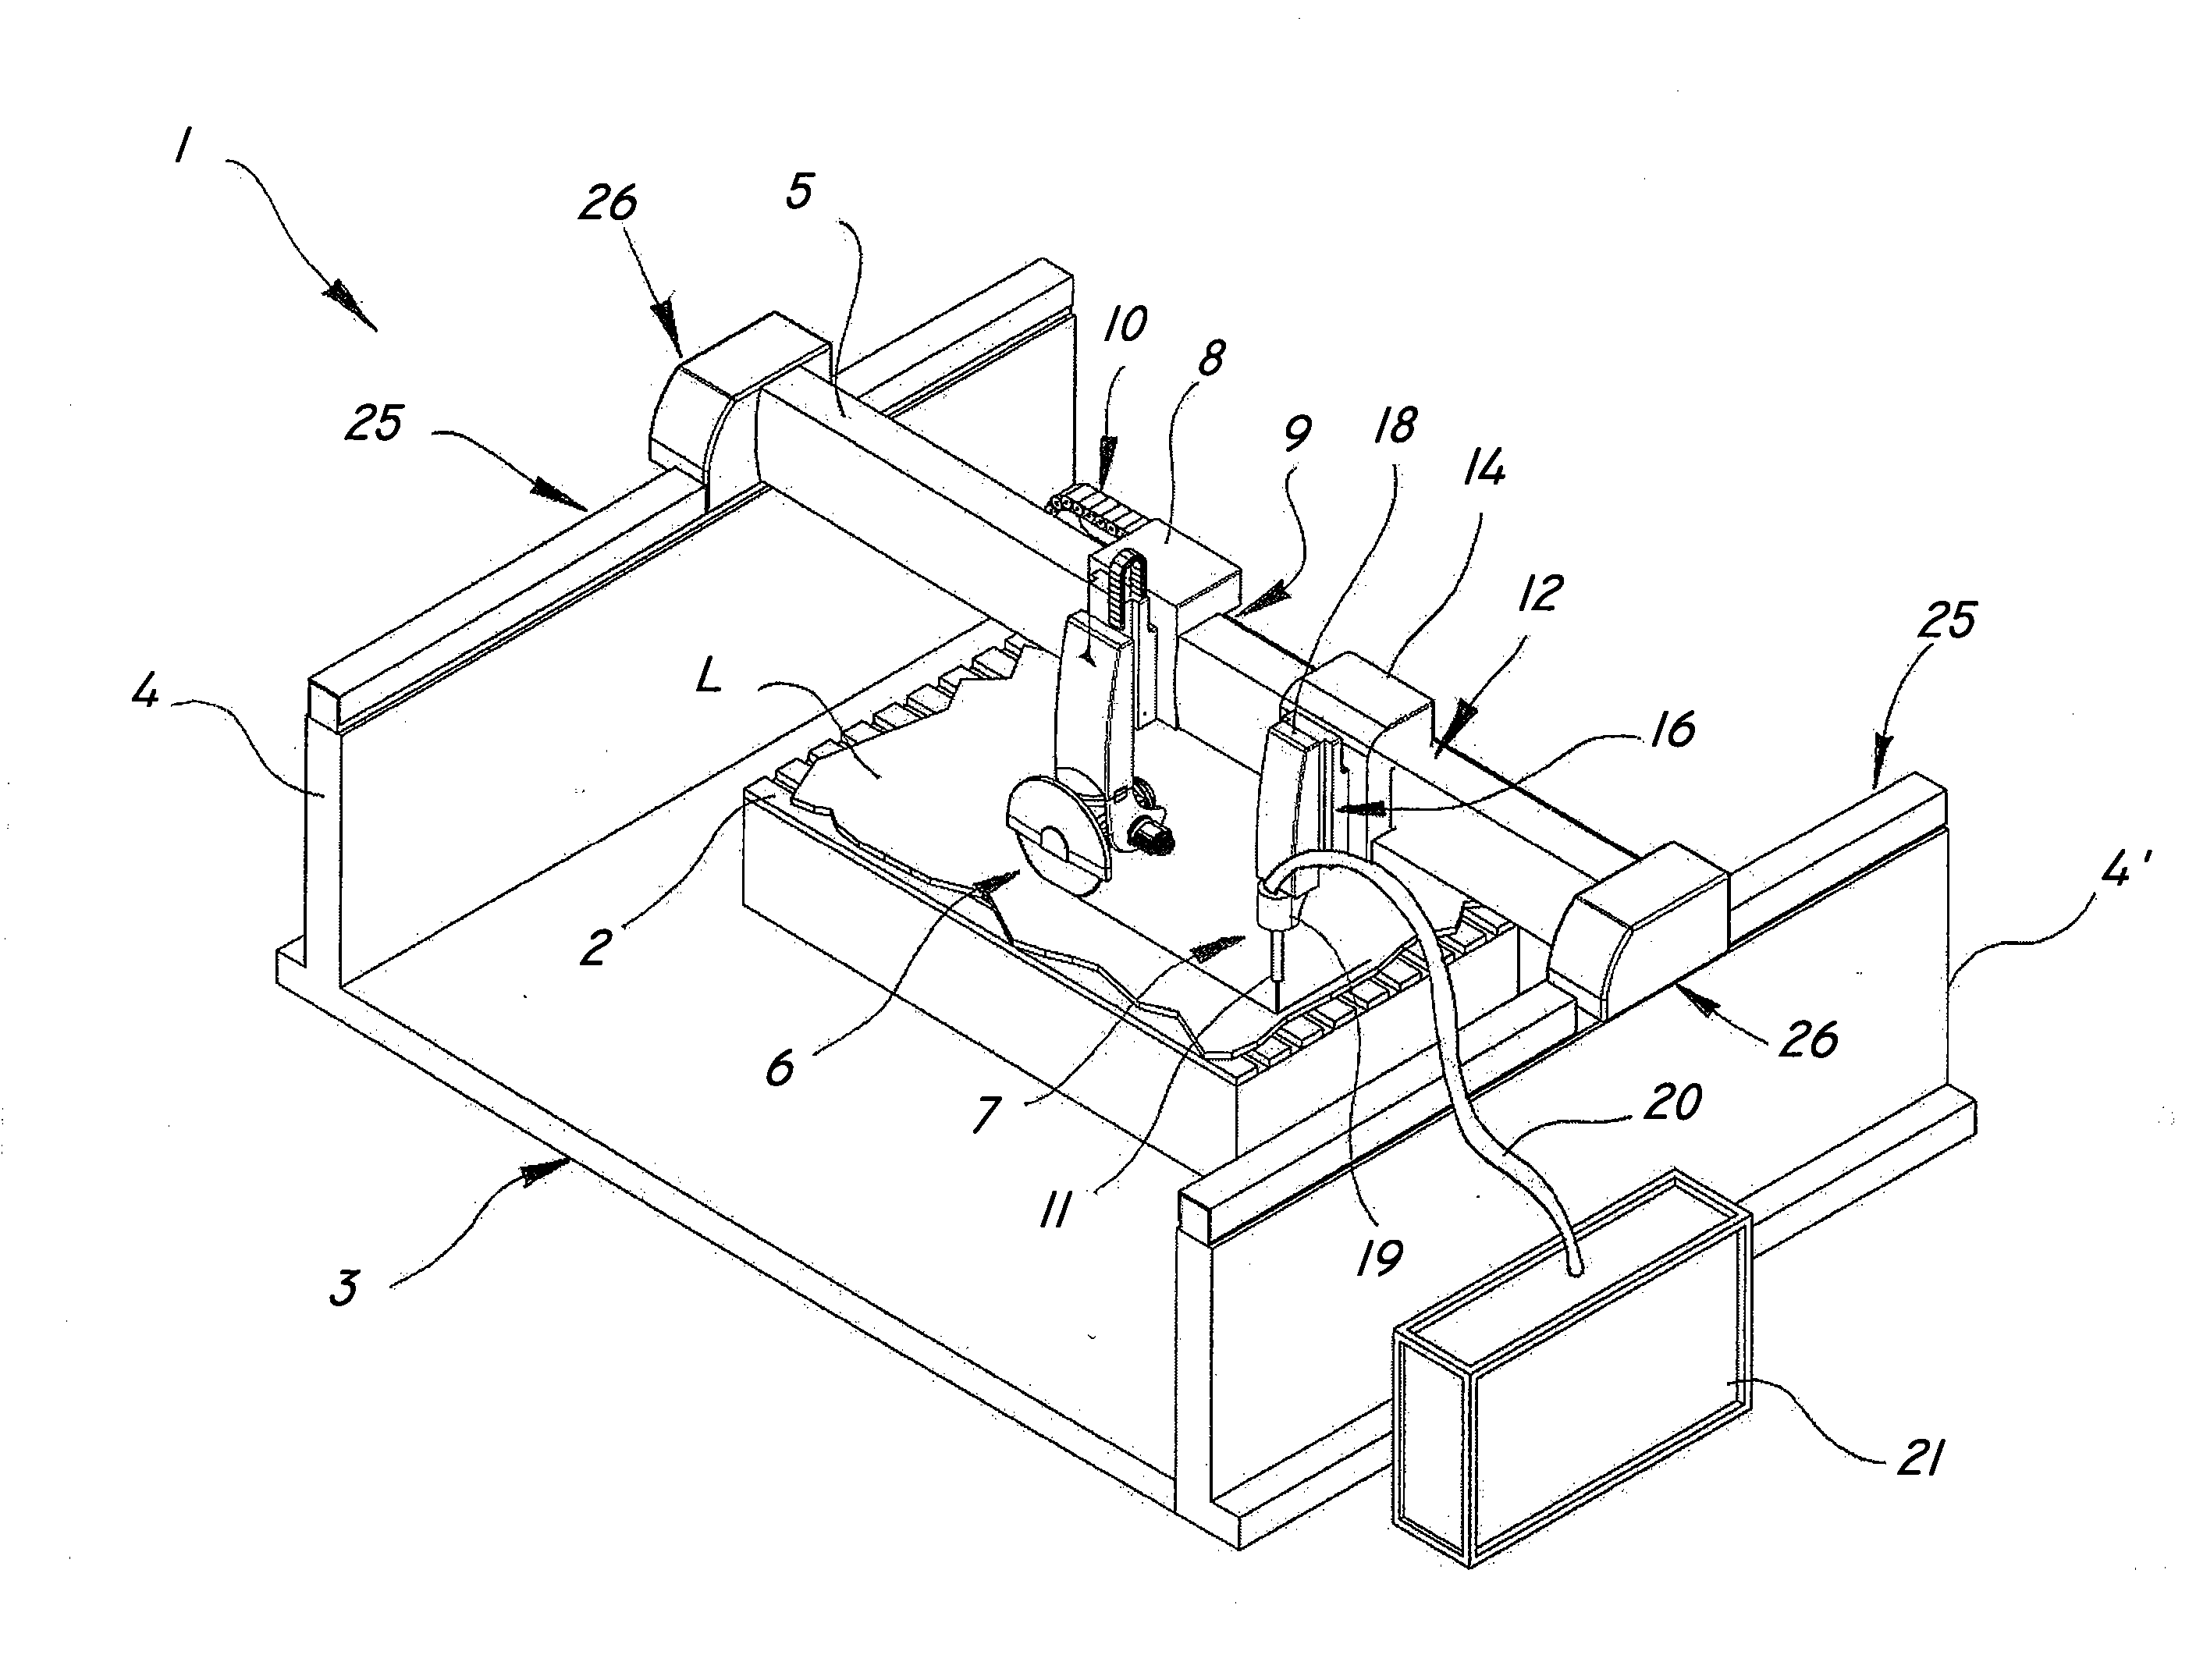 Multiple-tool machine for combined cutting of slabs of hard material